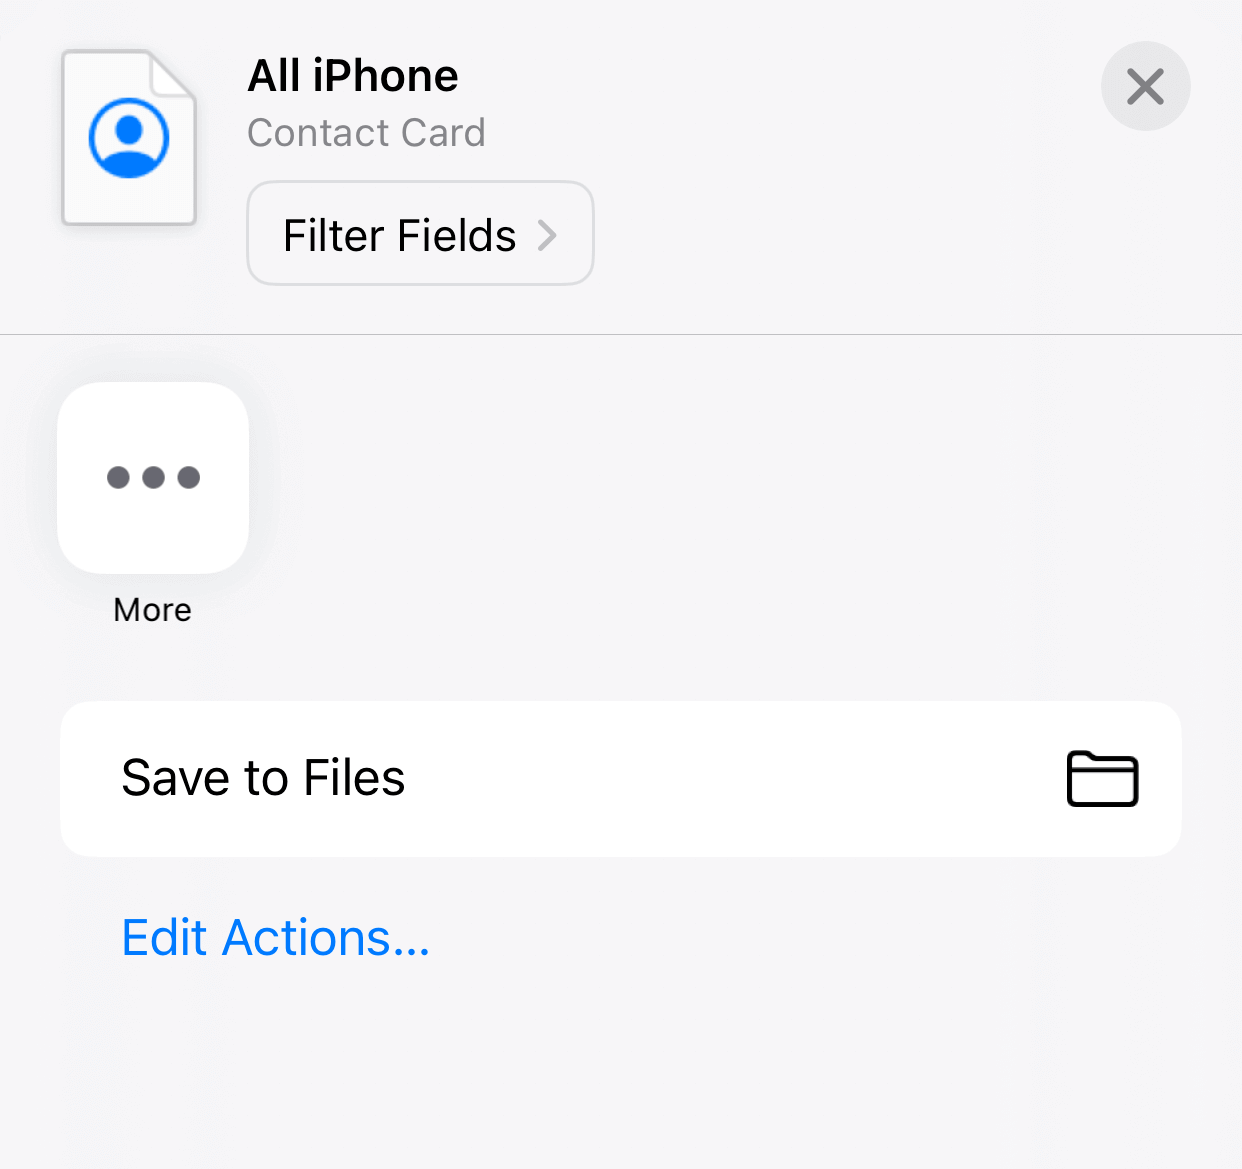 a dialog showing the Filter Fields option, the Save to Files option, and more